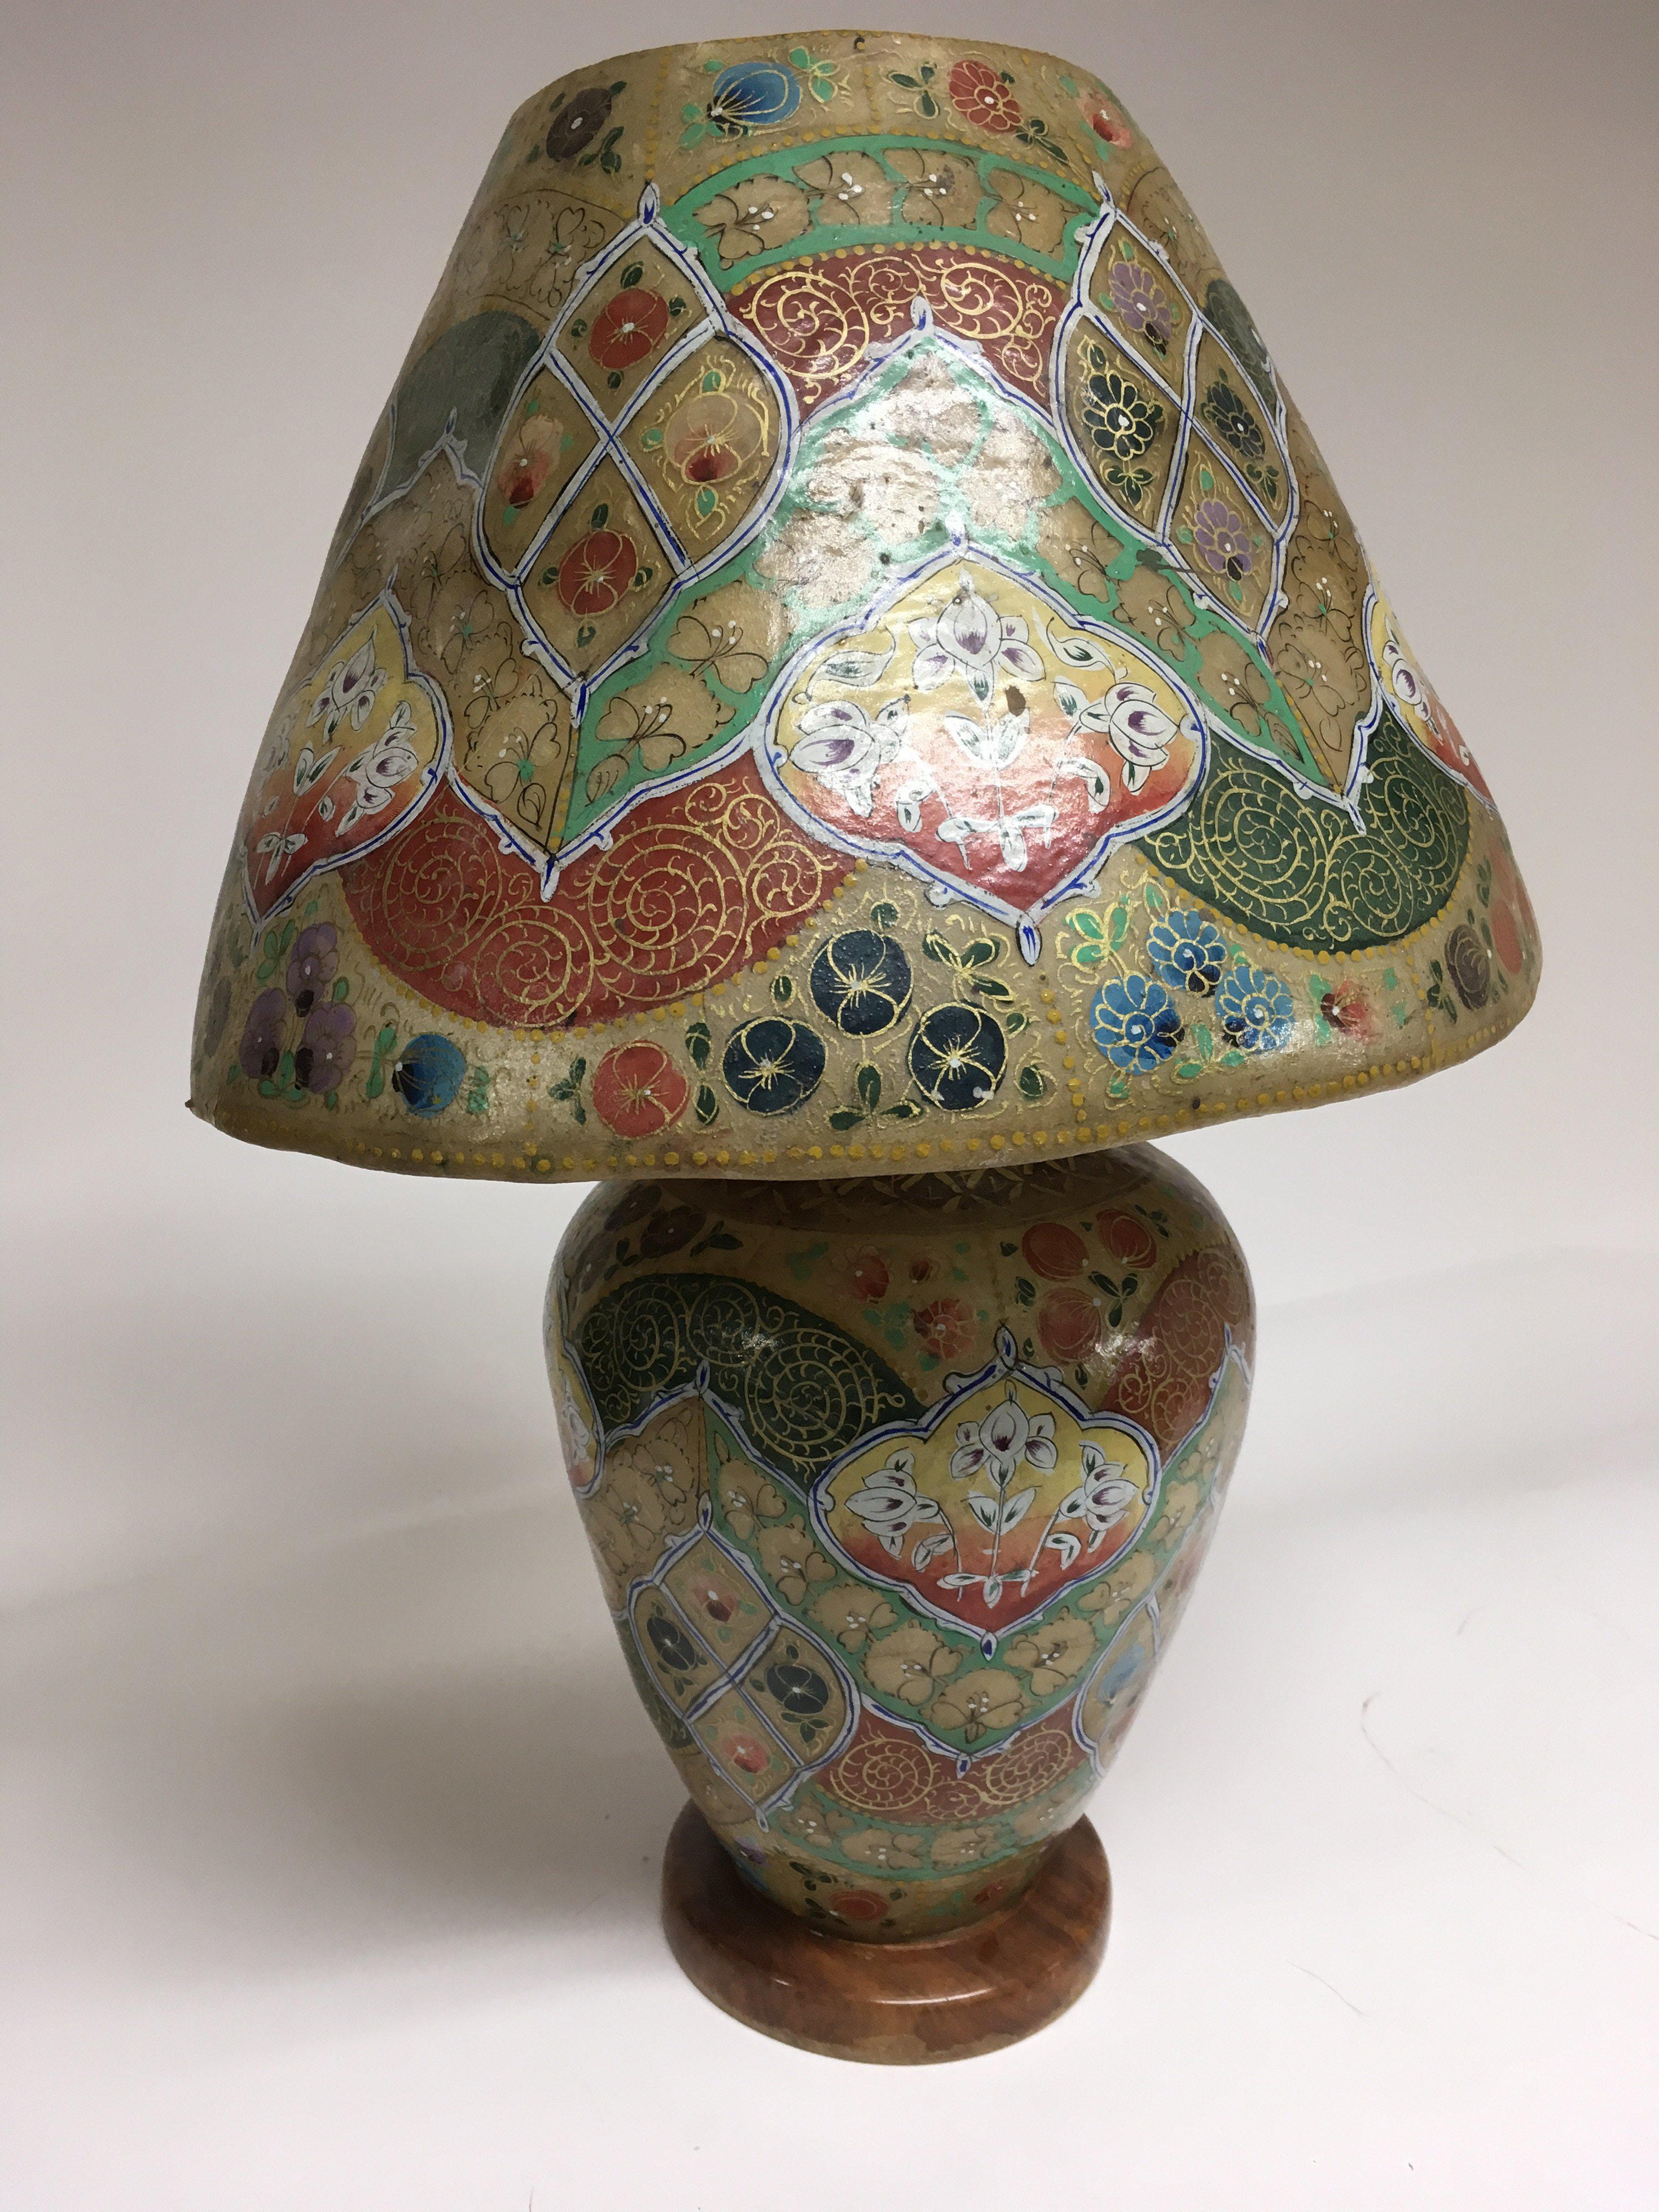 An Indian lamp and base made of skin, hand decorated